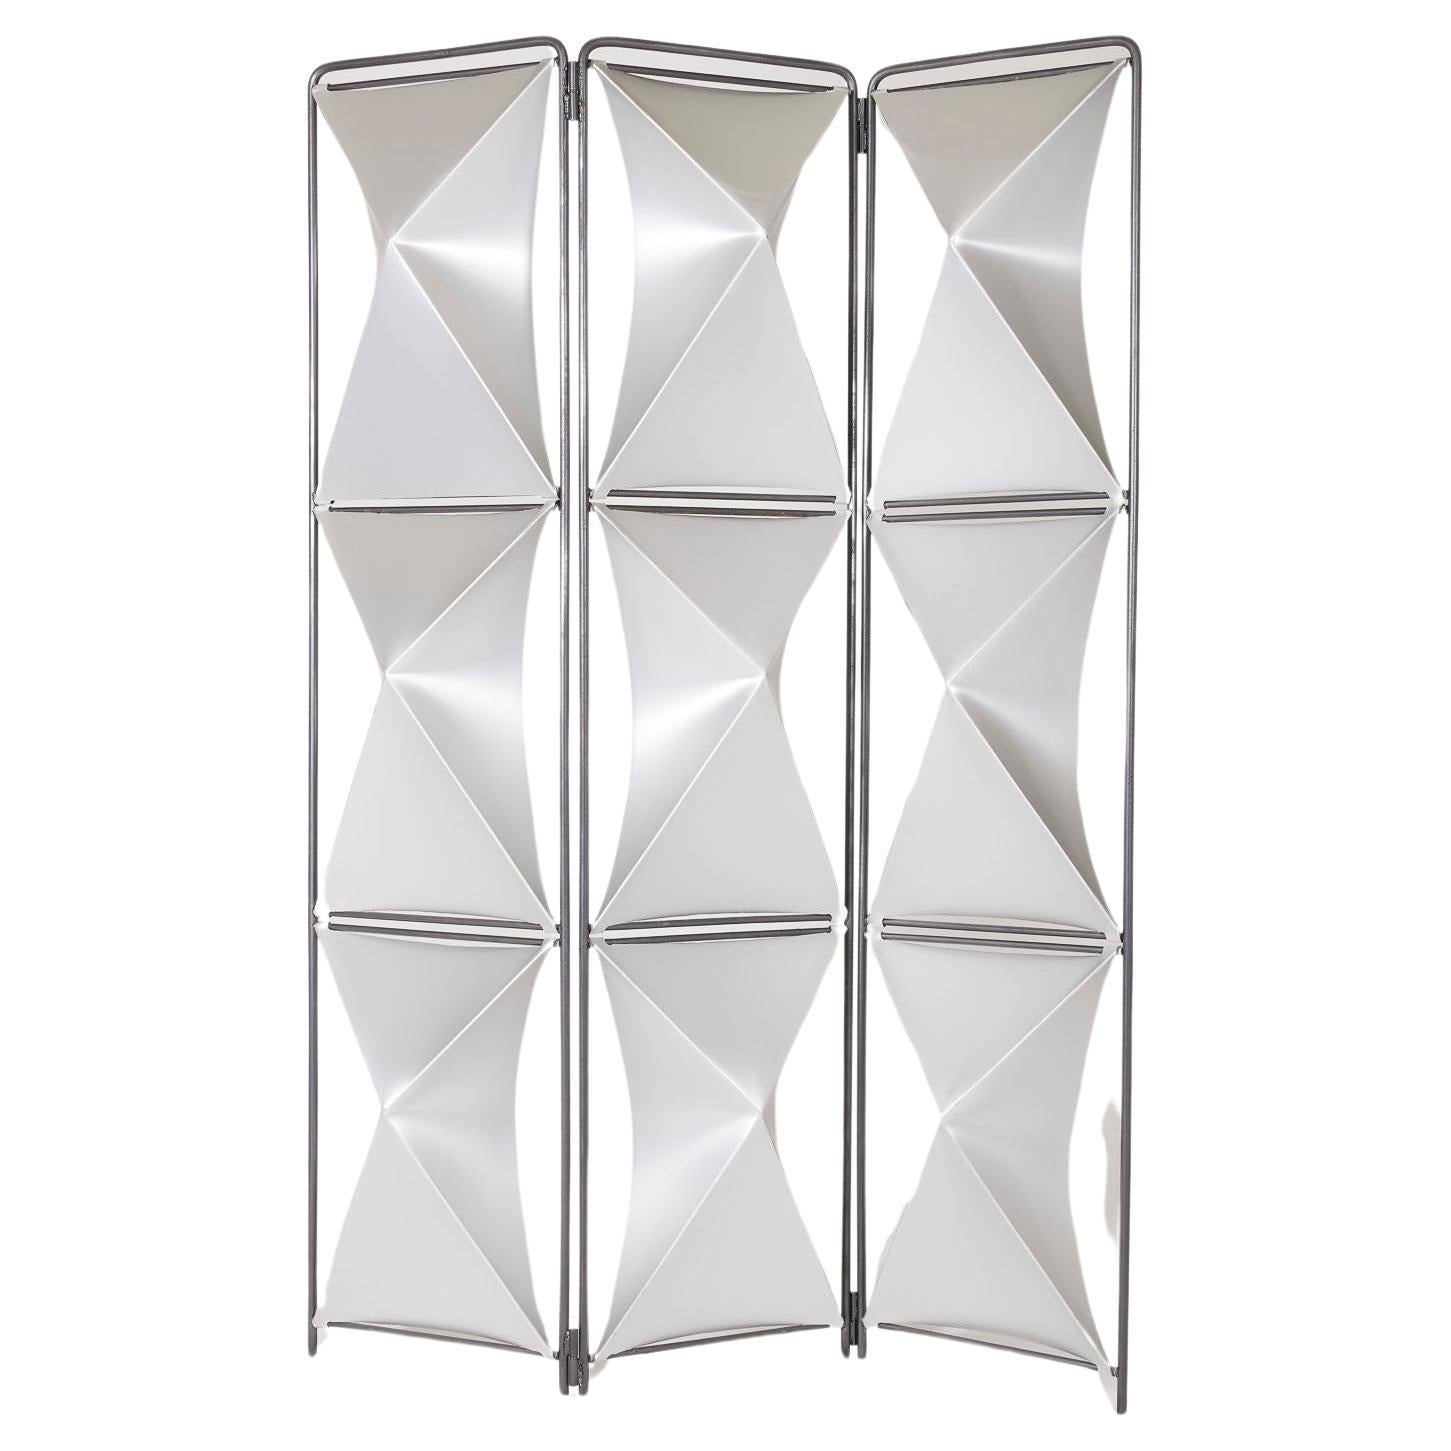 Perforated aluminum folding screen. Steel structure and aluminum elements heavily inspired by the lattice panels published by Sculptural Panels in the 1970s. In perfect condition.
DV272